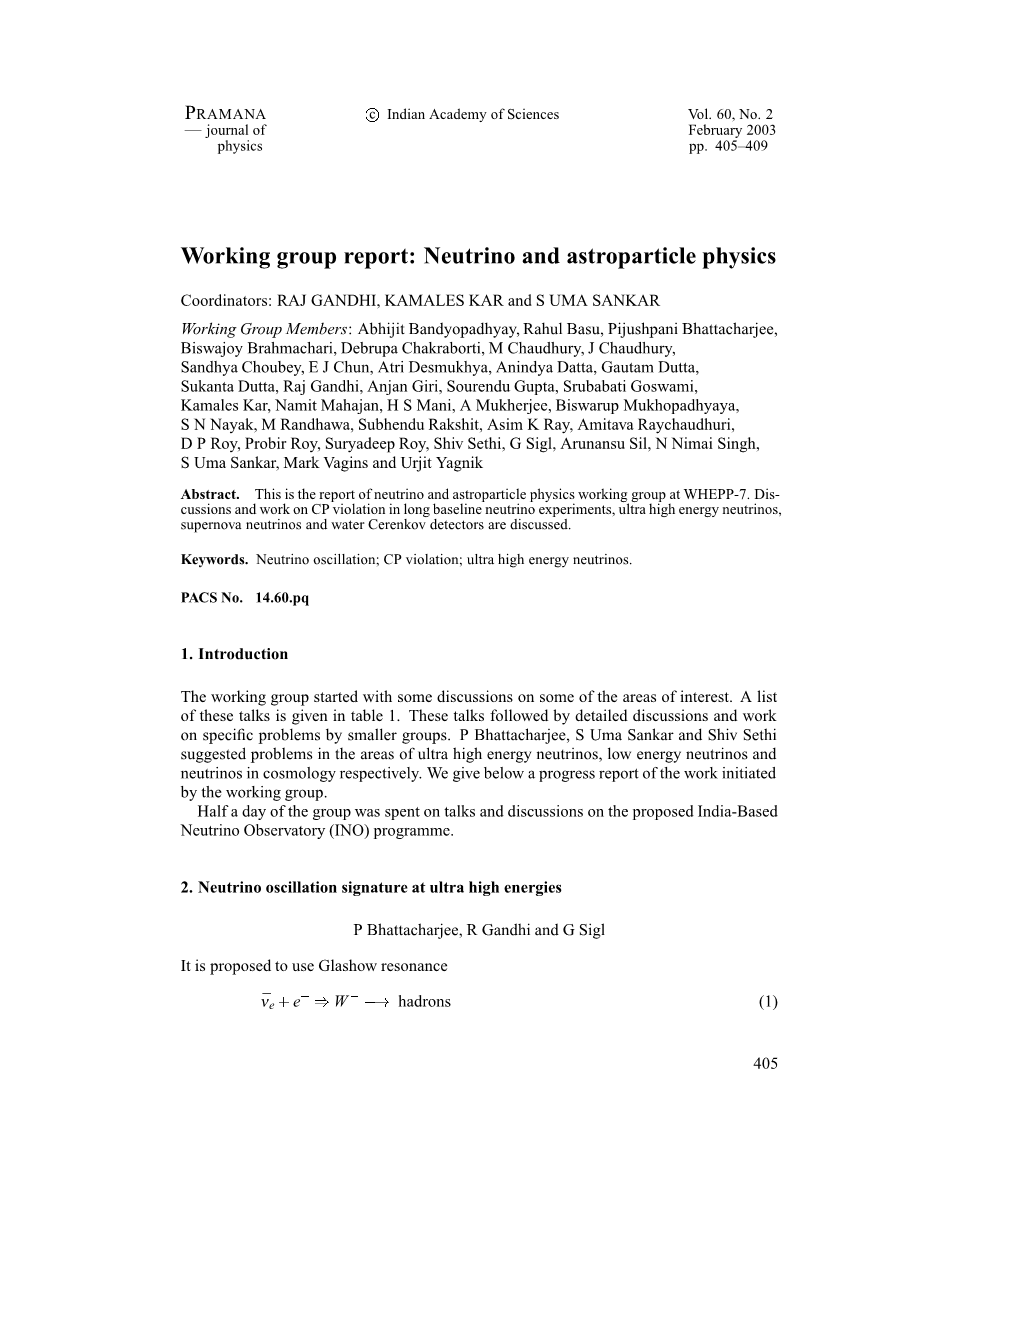 Working Group Report: Neutrino and Astroparticle Physics